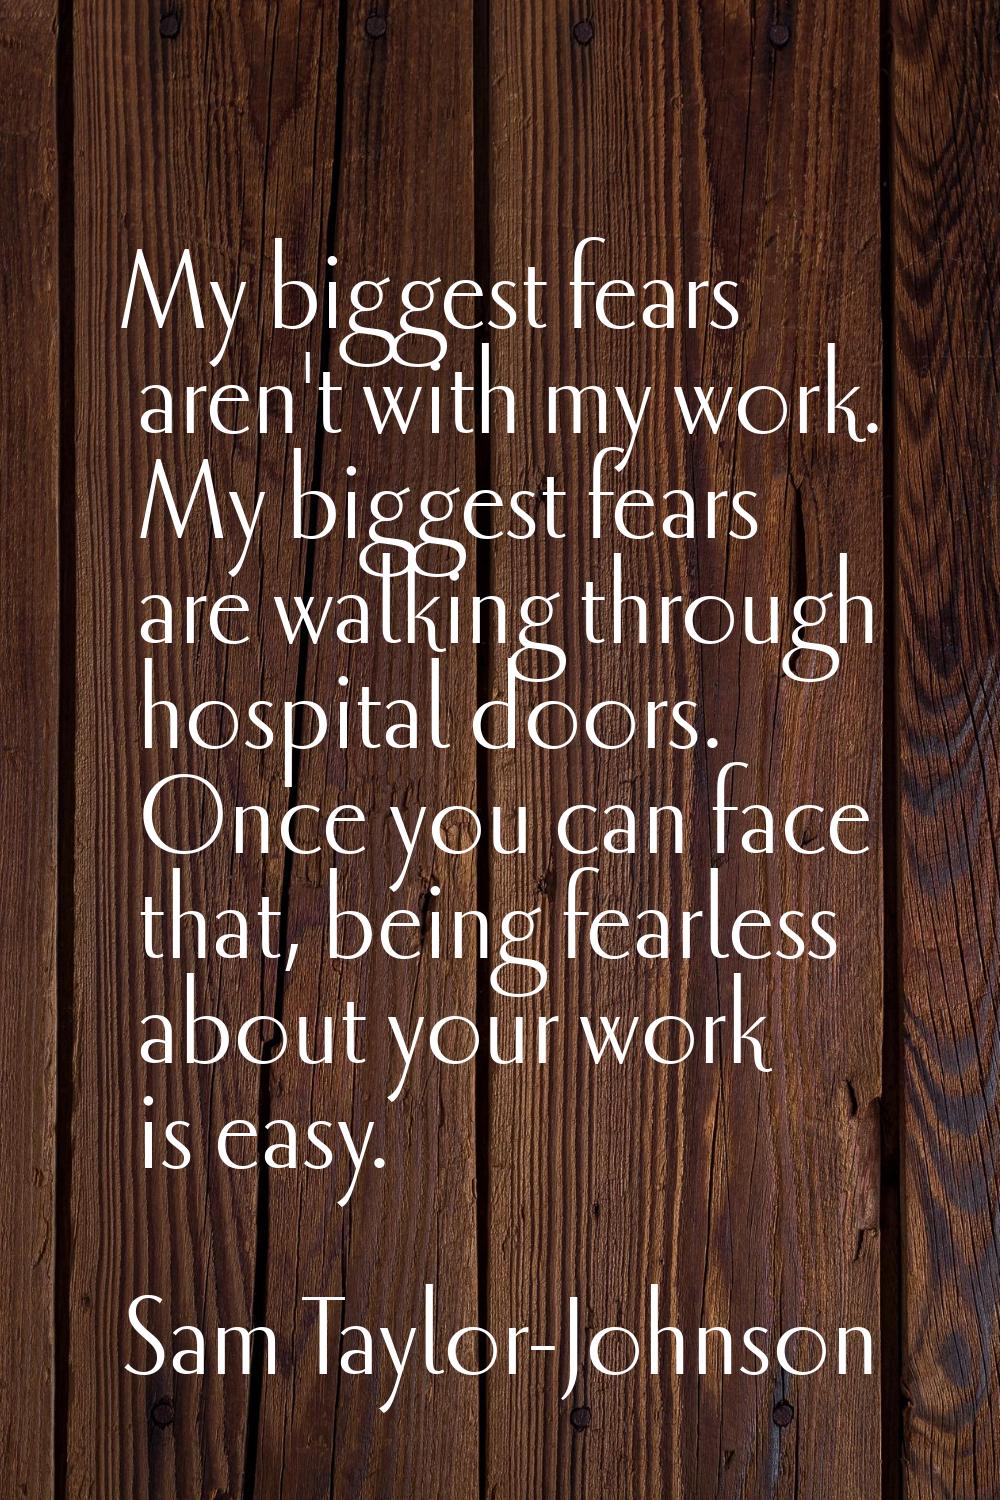 My biggest fears aren't with my work. My biggest fears are walking through hospital doors. Once you